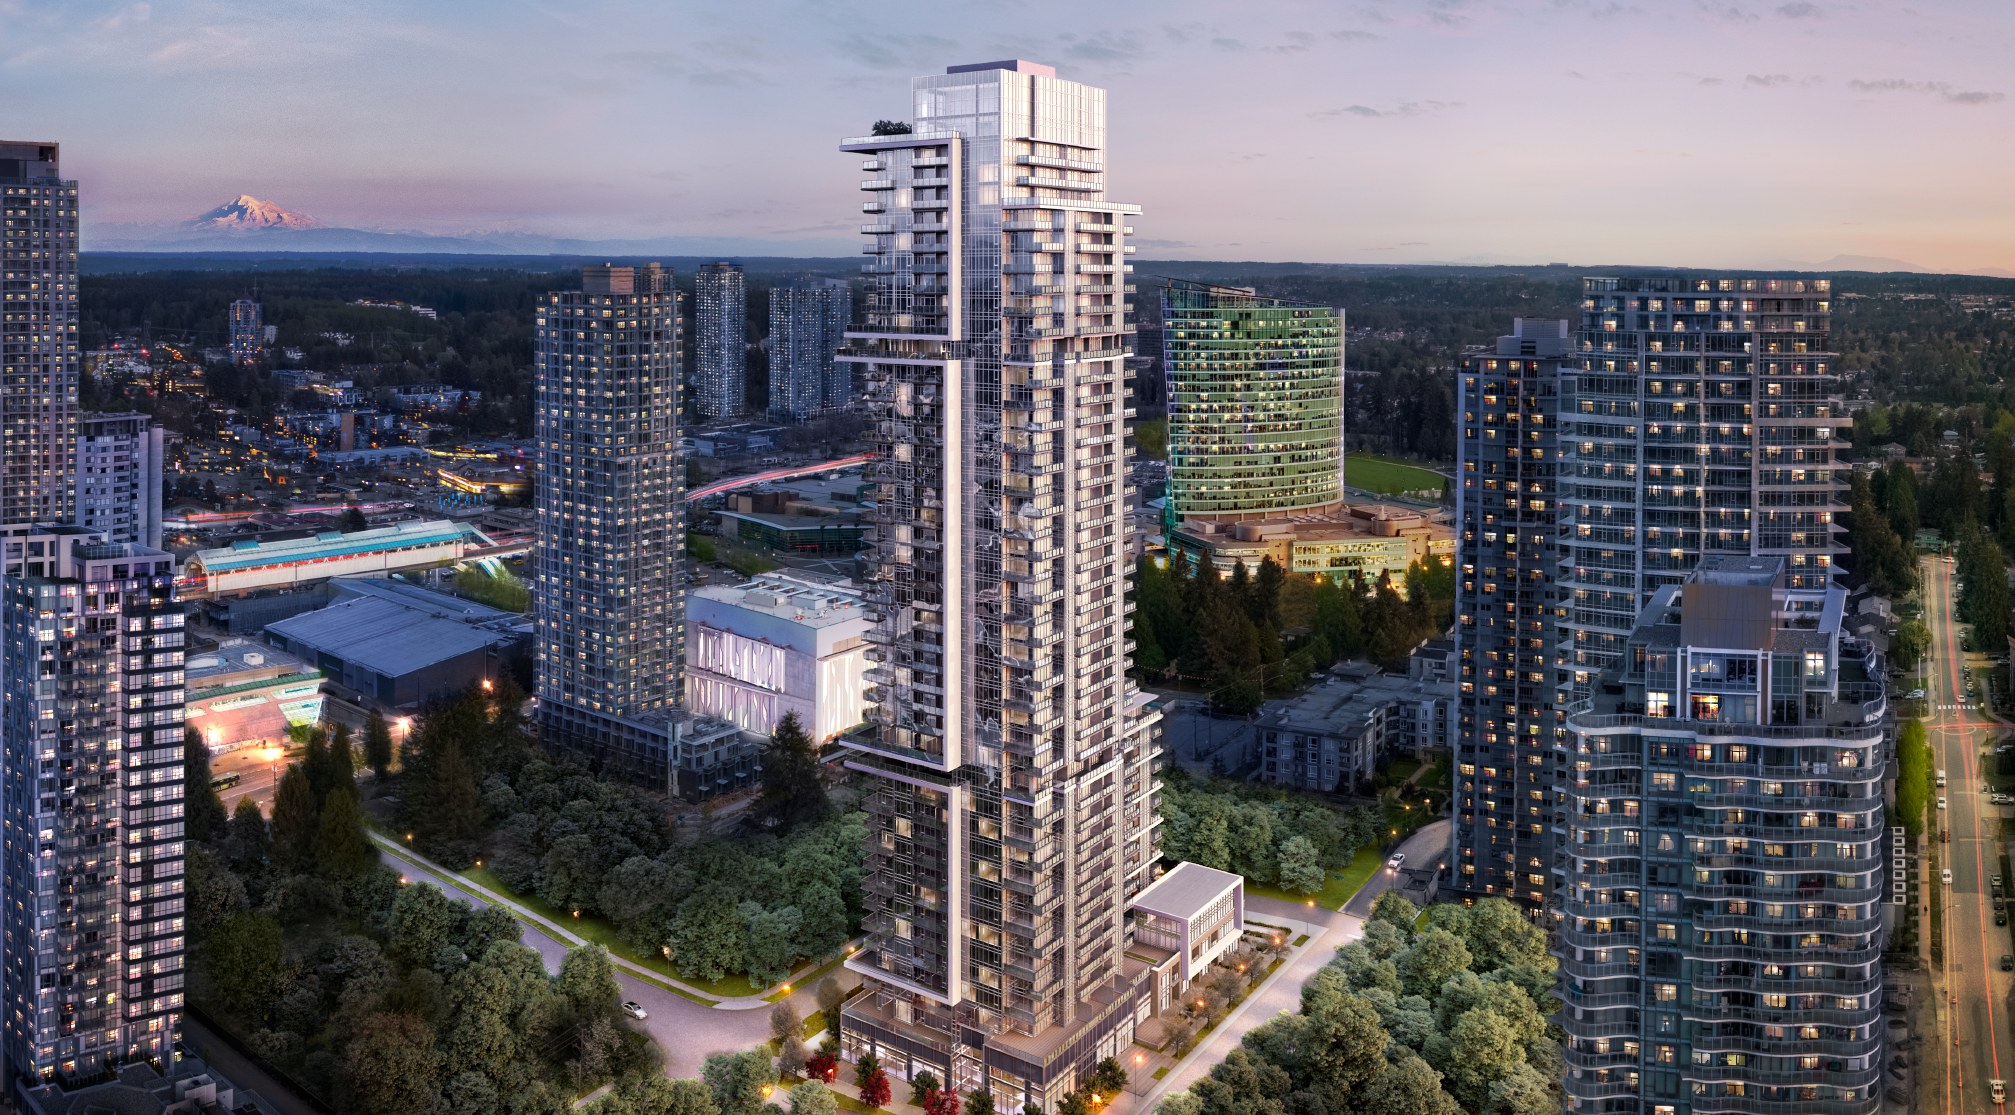 Image of One Central (West Village) in Surrey, BC, Canada